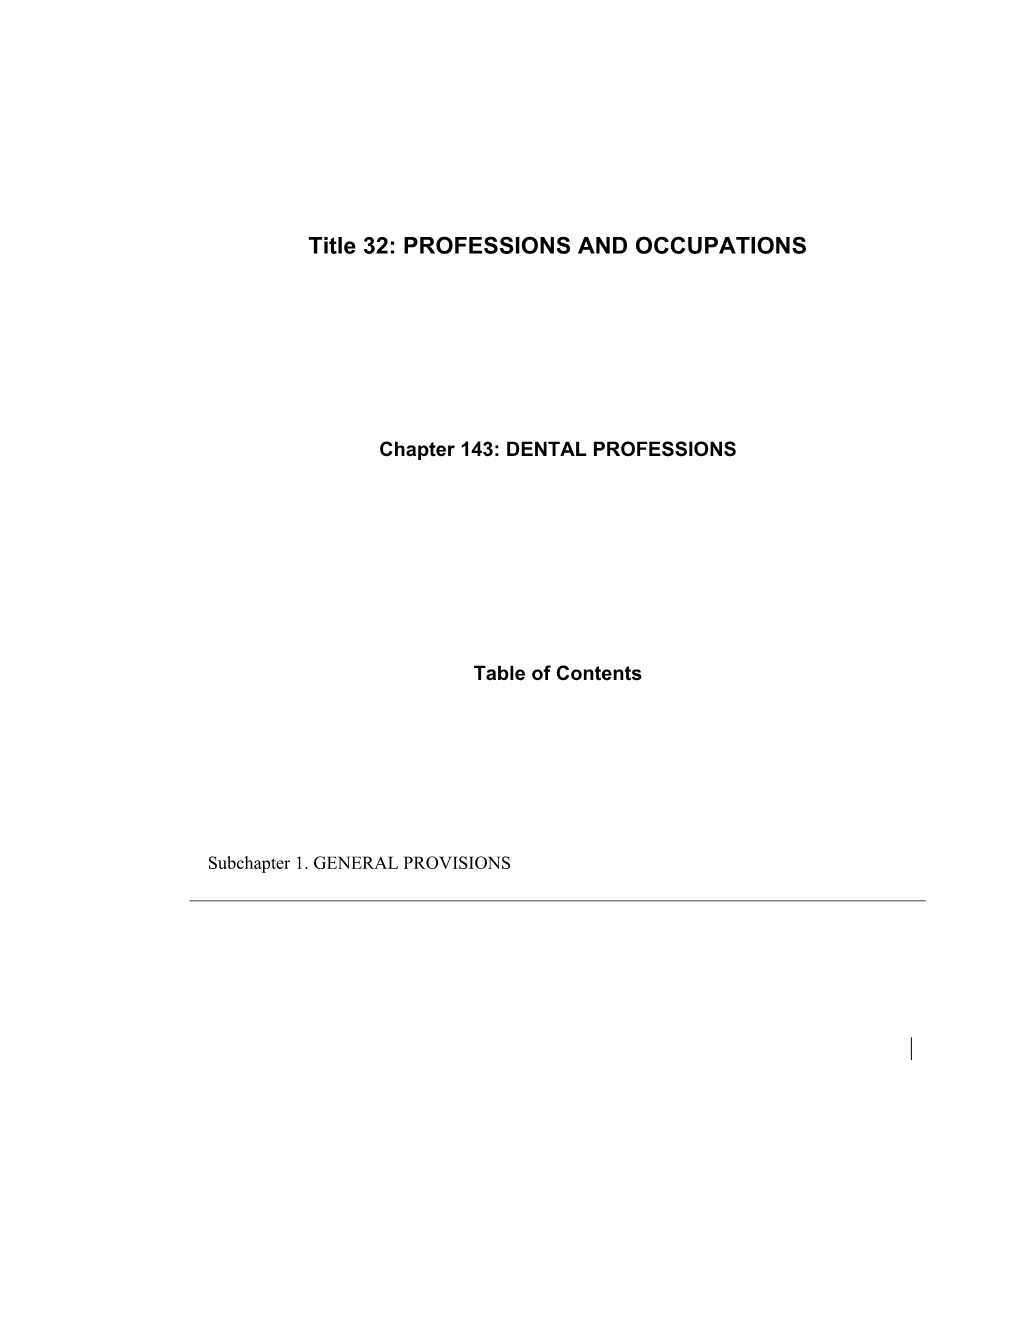 MRS Title 32, Chapter143: DENTAL PROFESSIONS